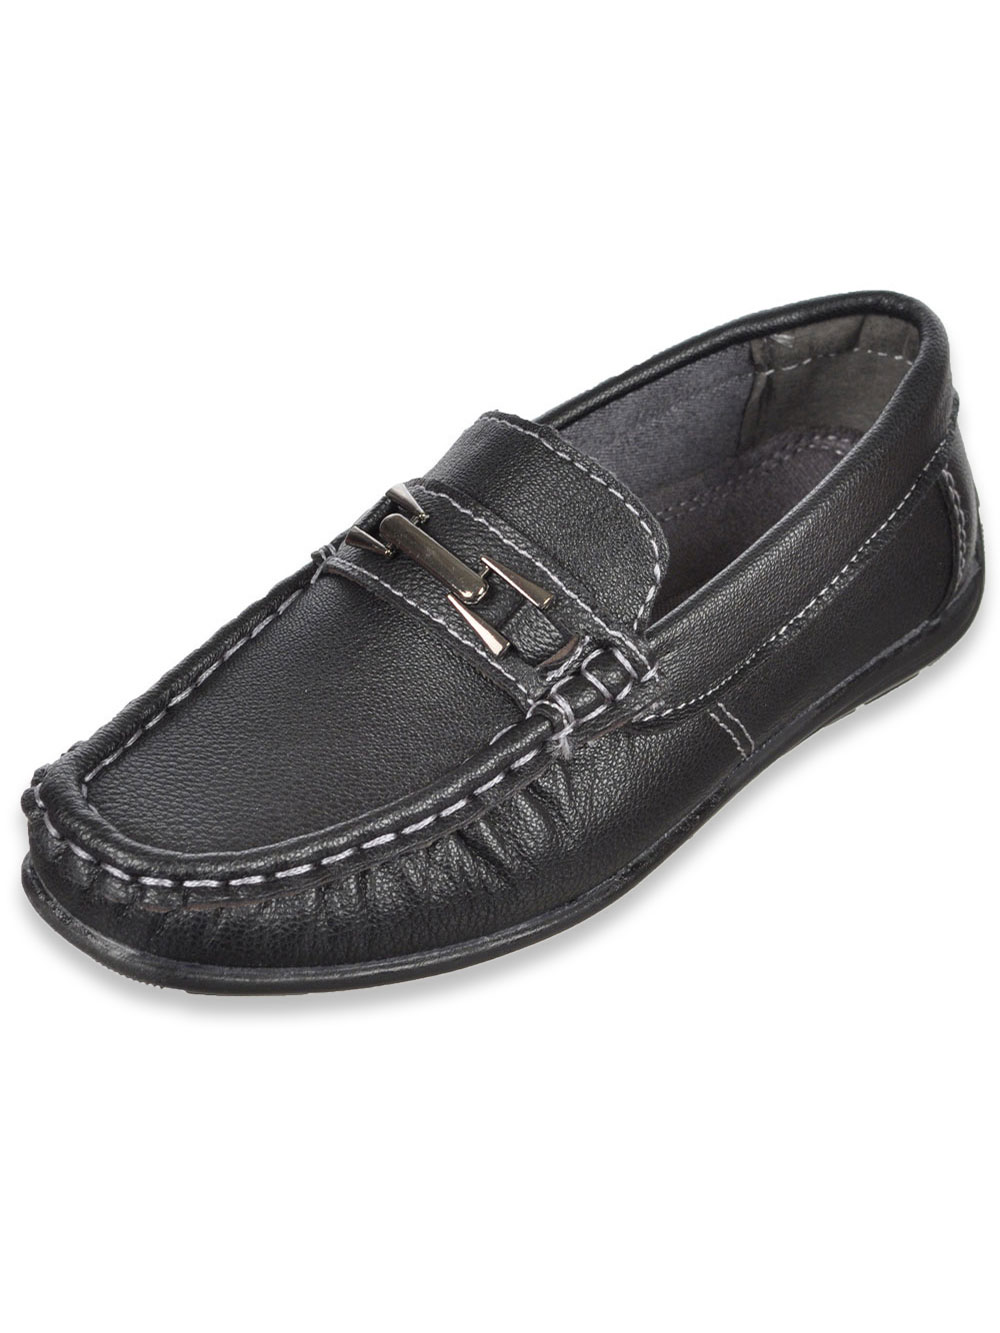 Dress Shoes Loafers